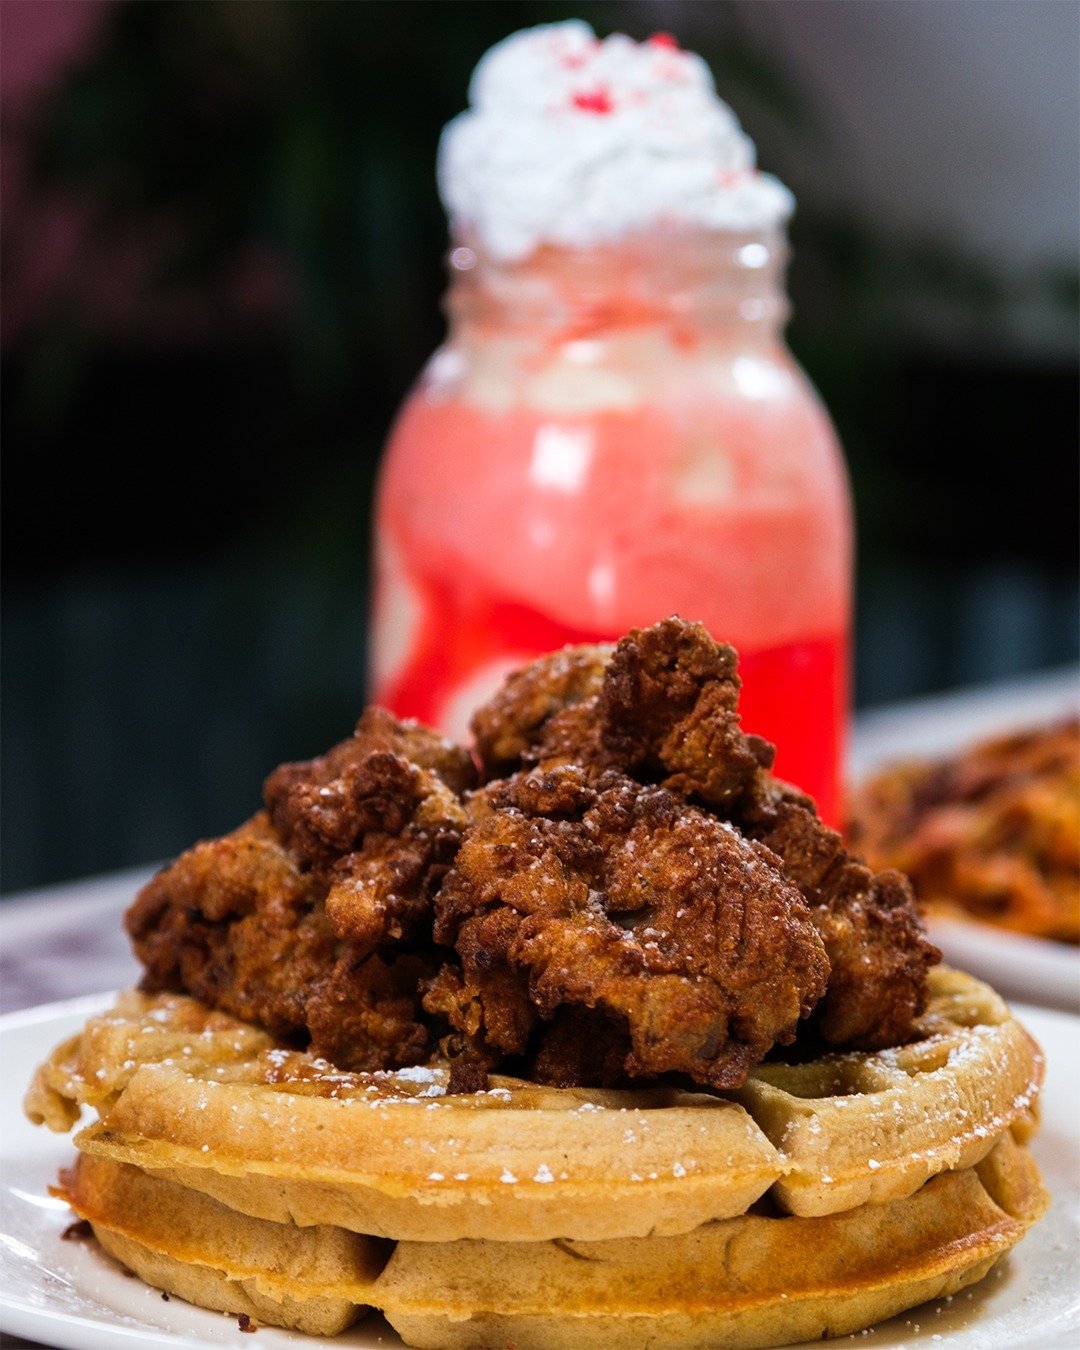 Our Chik'n &amp; Waffles is available ALL day!

You won&rsquo;t be dissapointed! 😋

🌱Nanas Kitchen
🗓️Tue-Sun 11am-7pm
💻www.nanaskitchenaz.com
📍777 N Arizona Ave Suite 7 Chandler